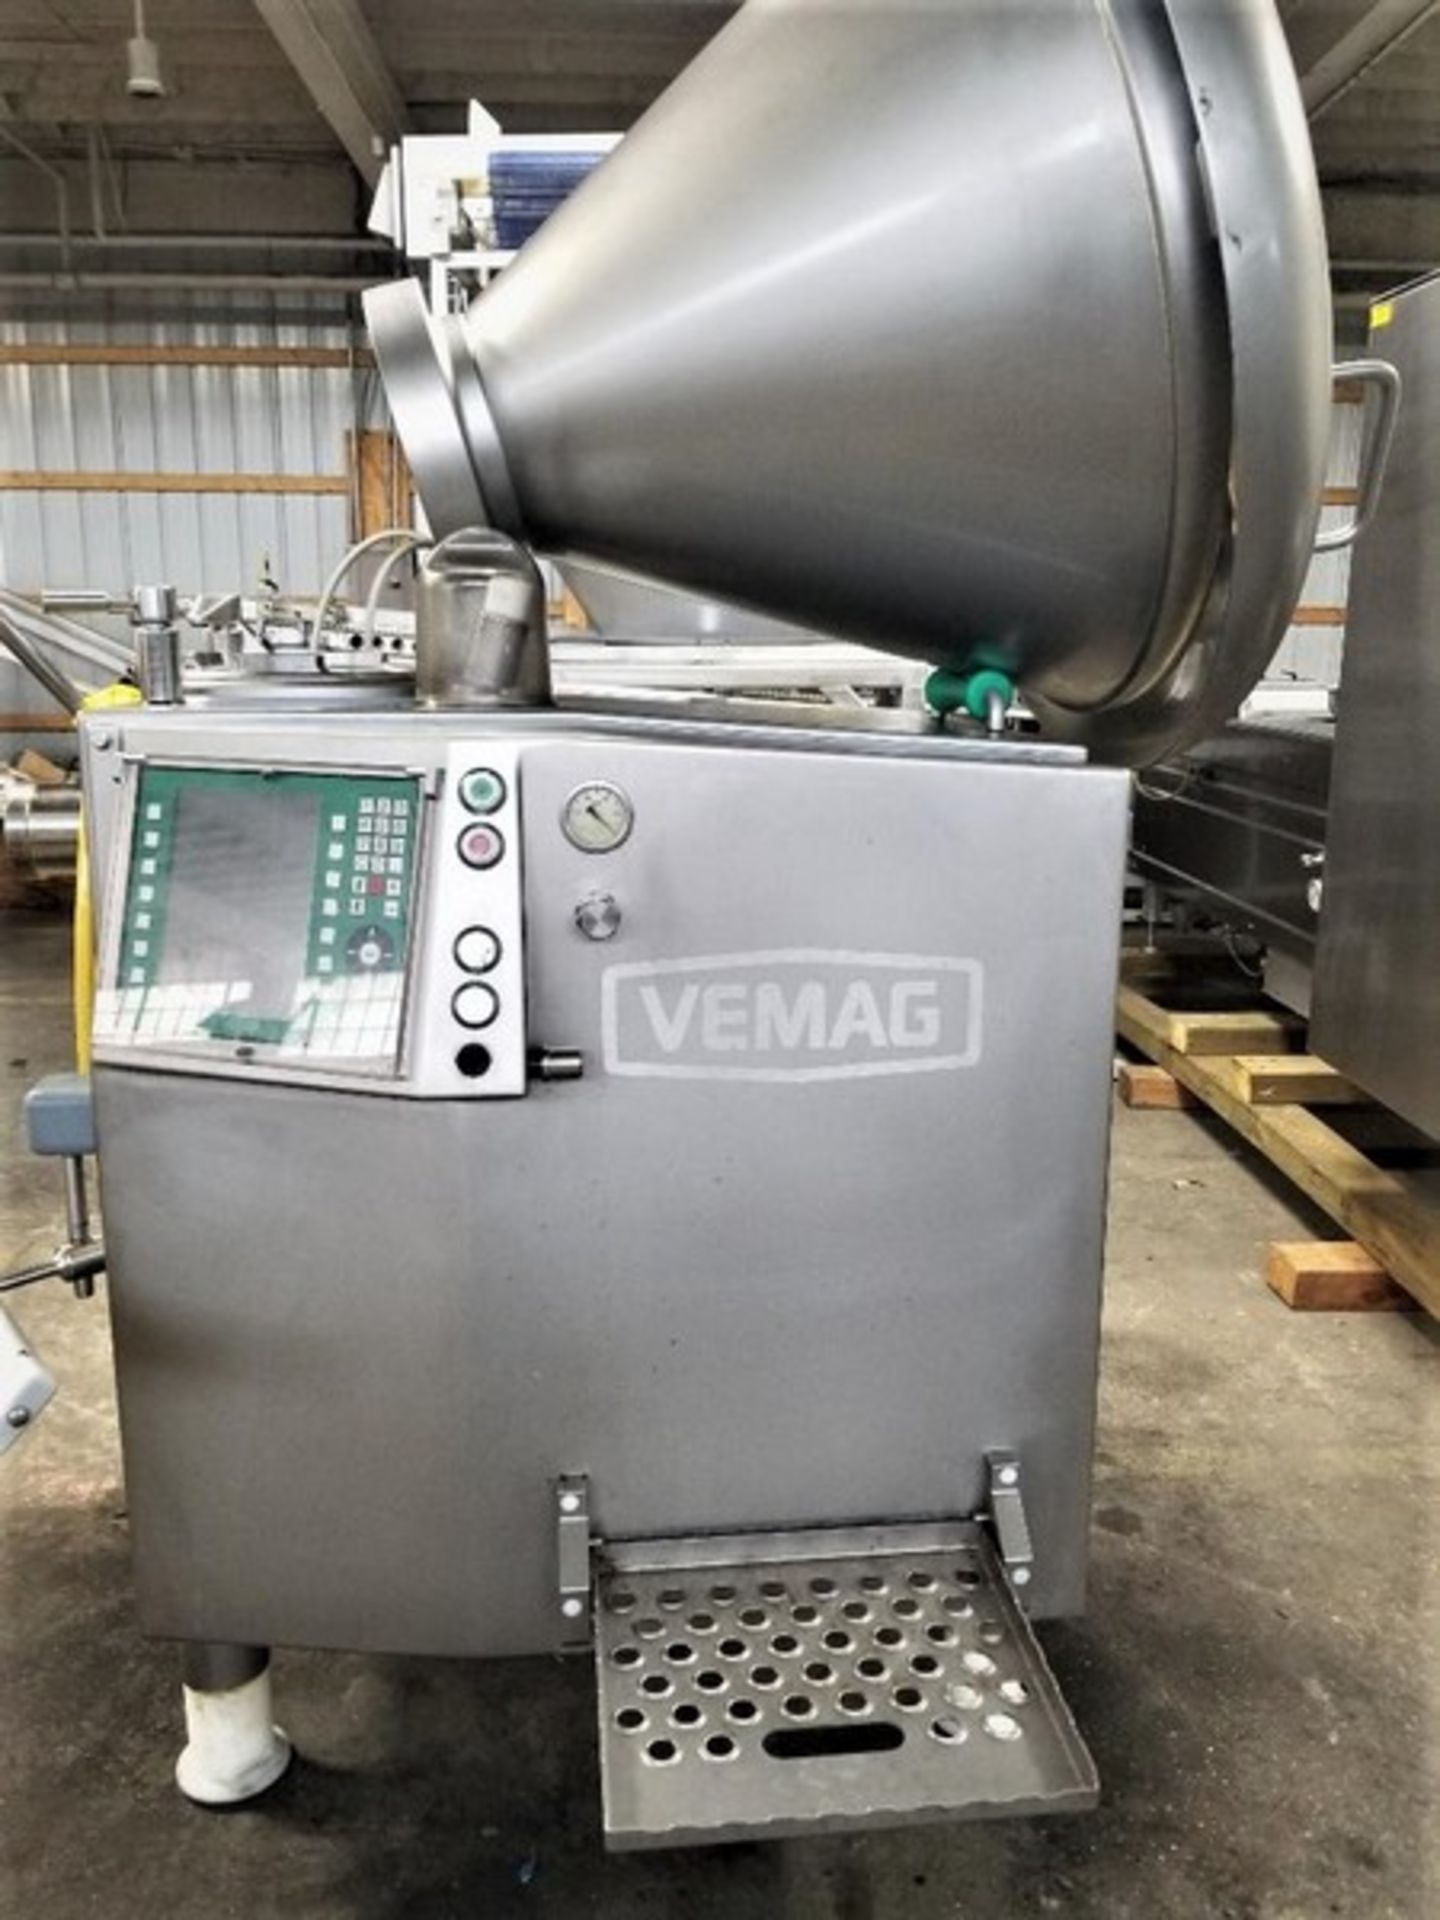 Vemag Robot HP10ED Vacuum Filler, S/N 1681003, Mfg. 2013 -- This system was just removed from the